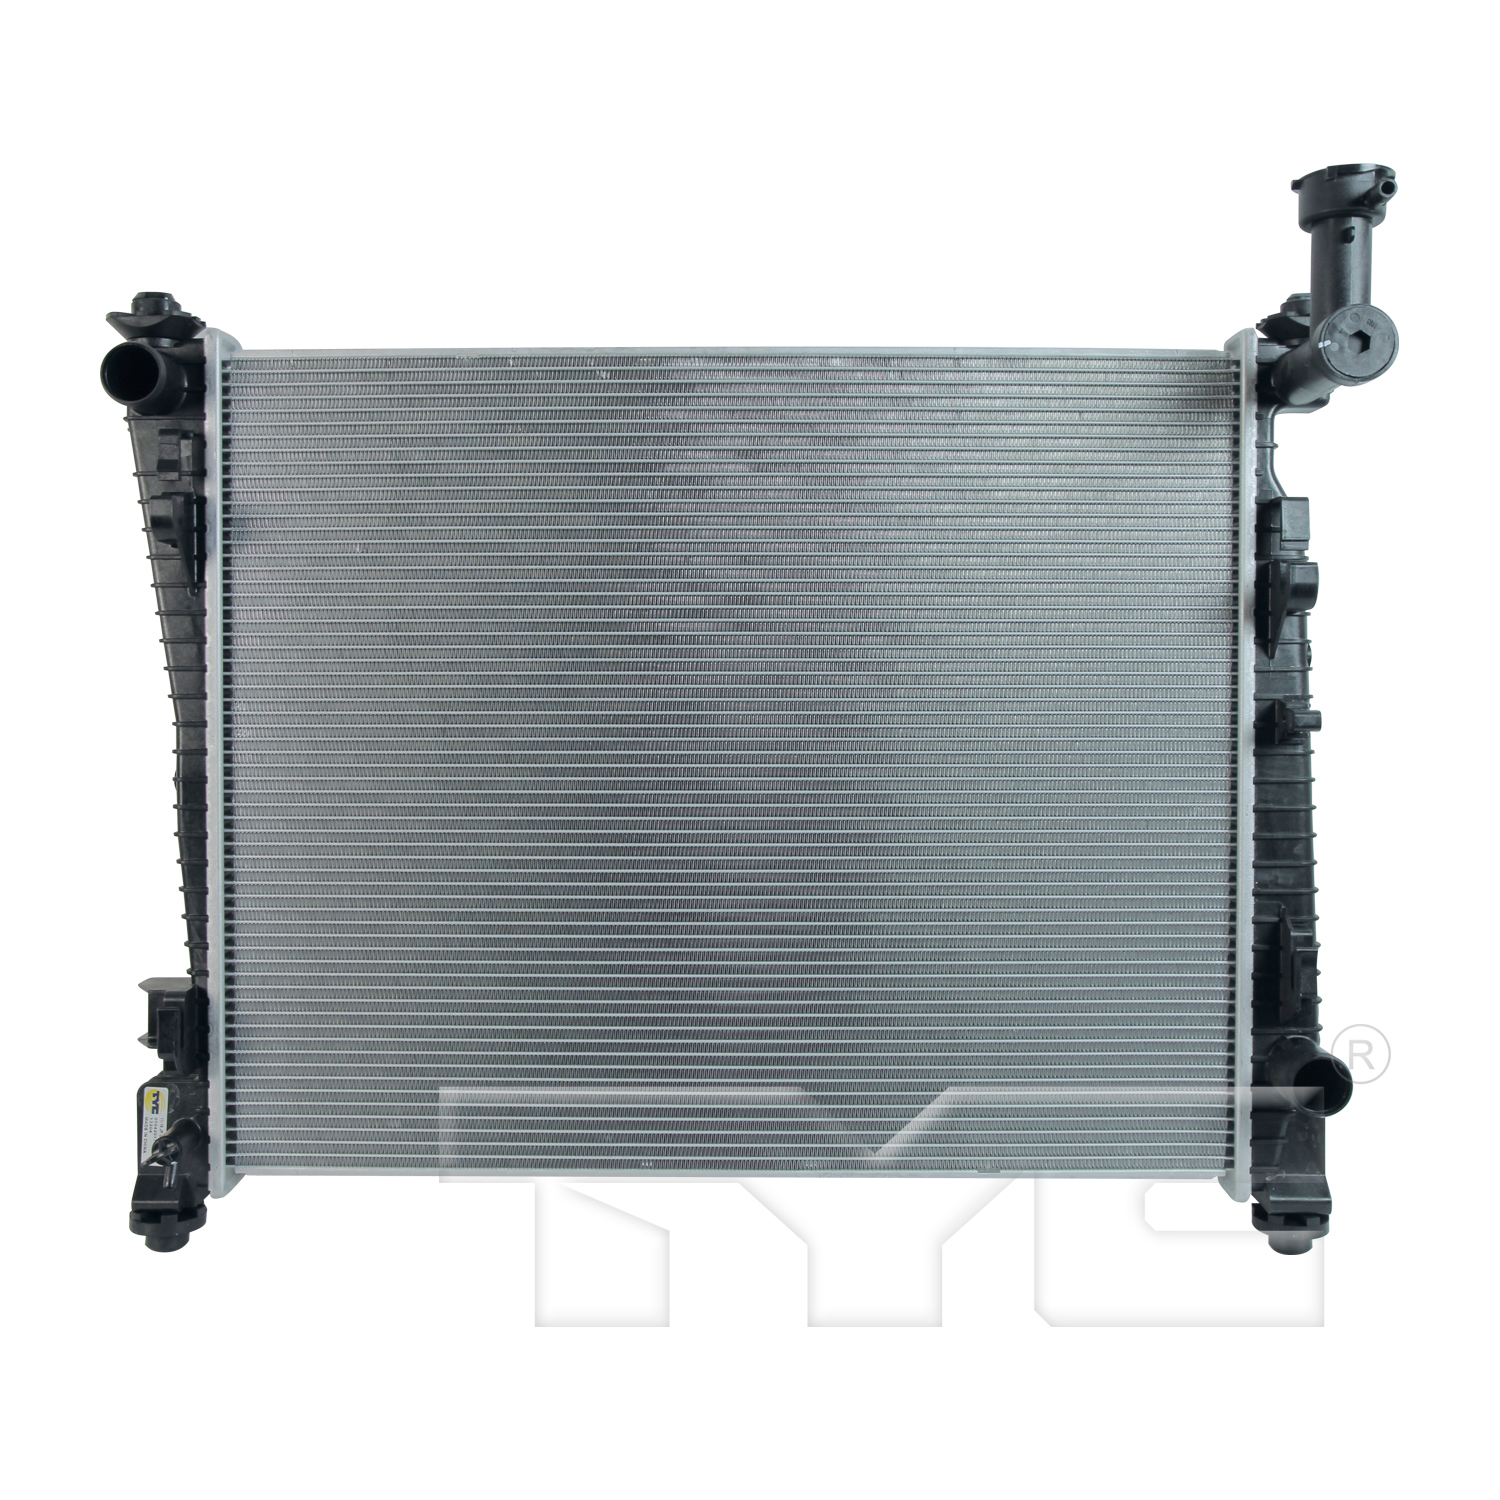 Aftermarket RADIATORS for JEEP - GRAND CHEROKEE WK, GRAND CHEROKEE WK,22-22,Radiator assembly